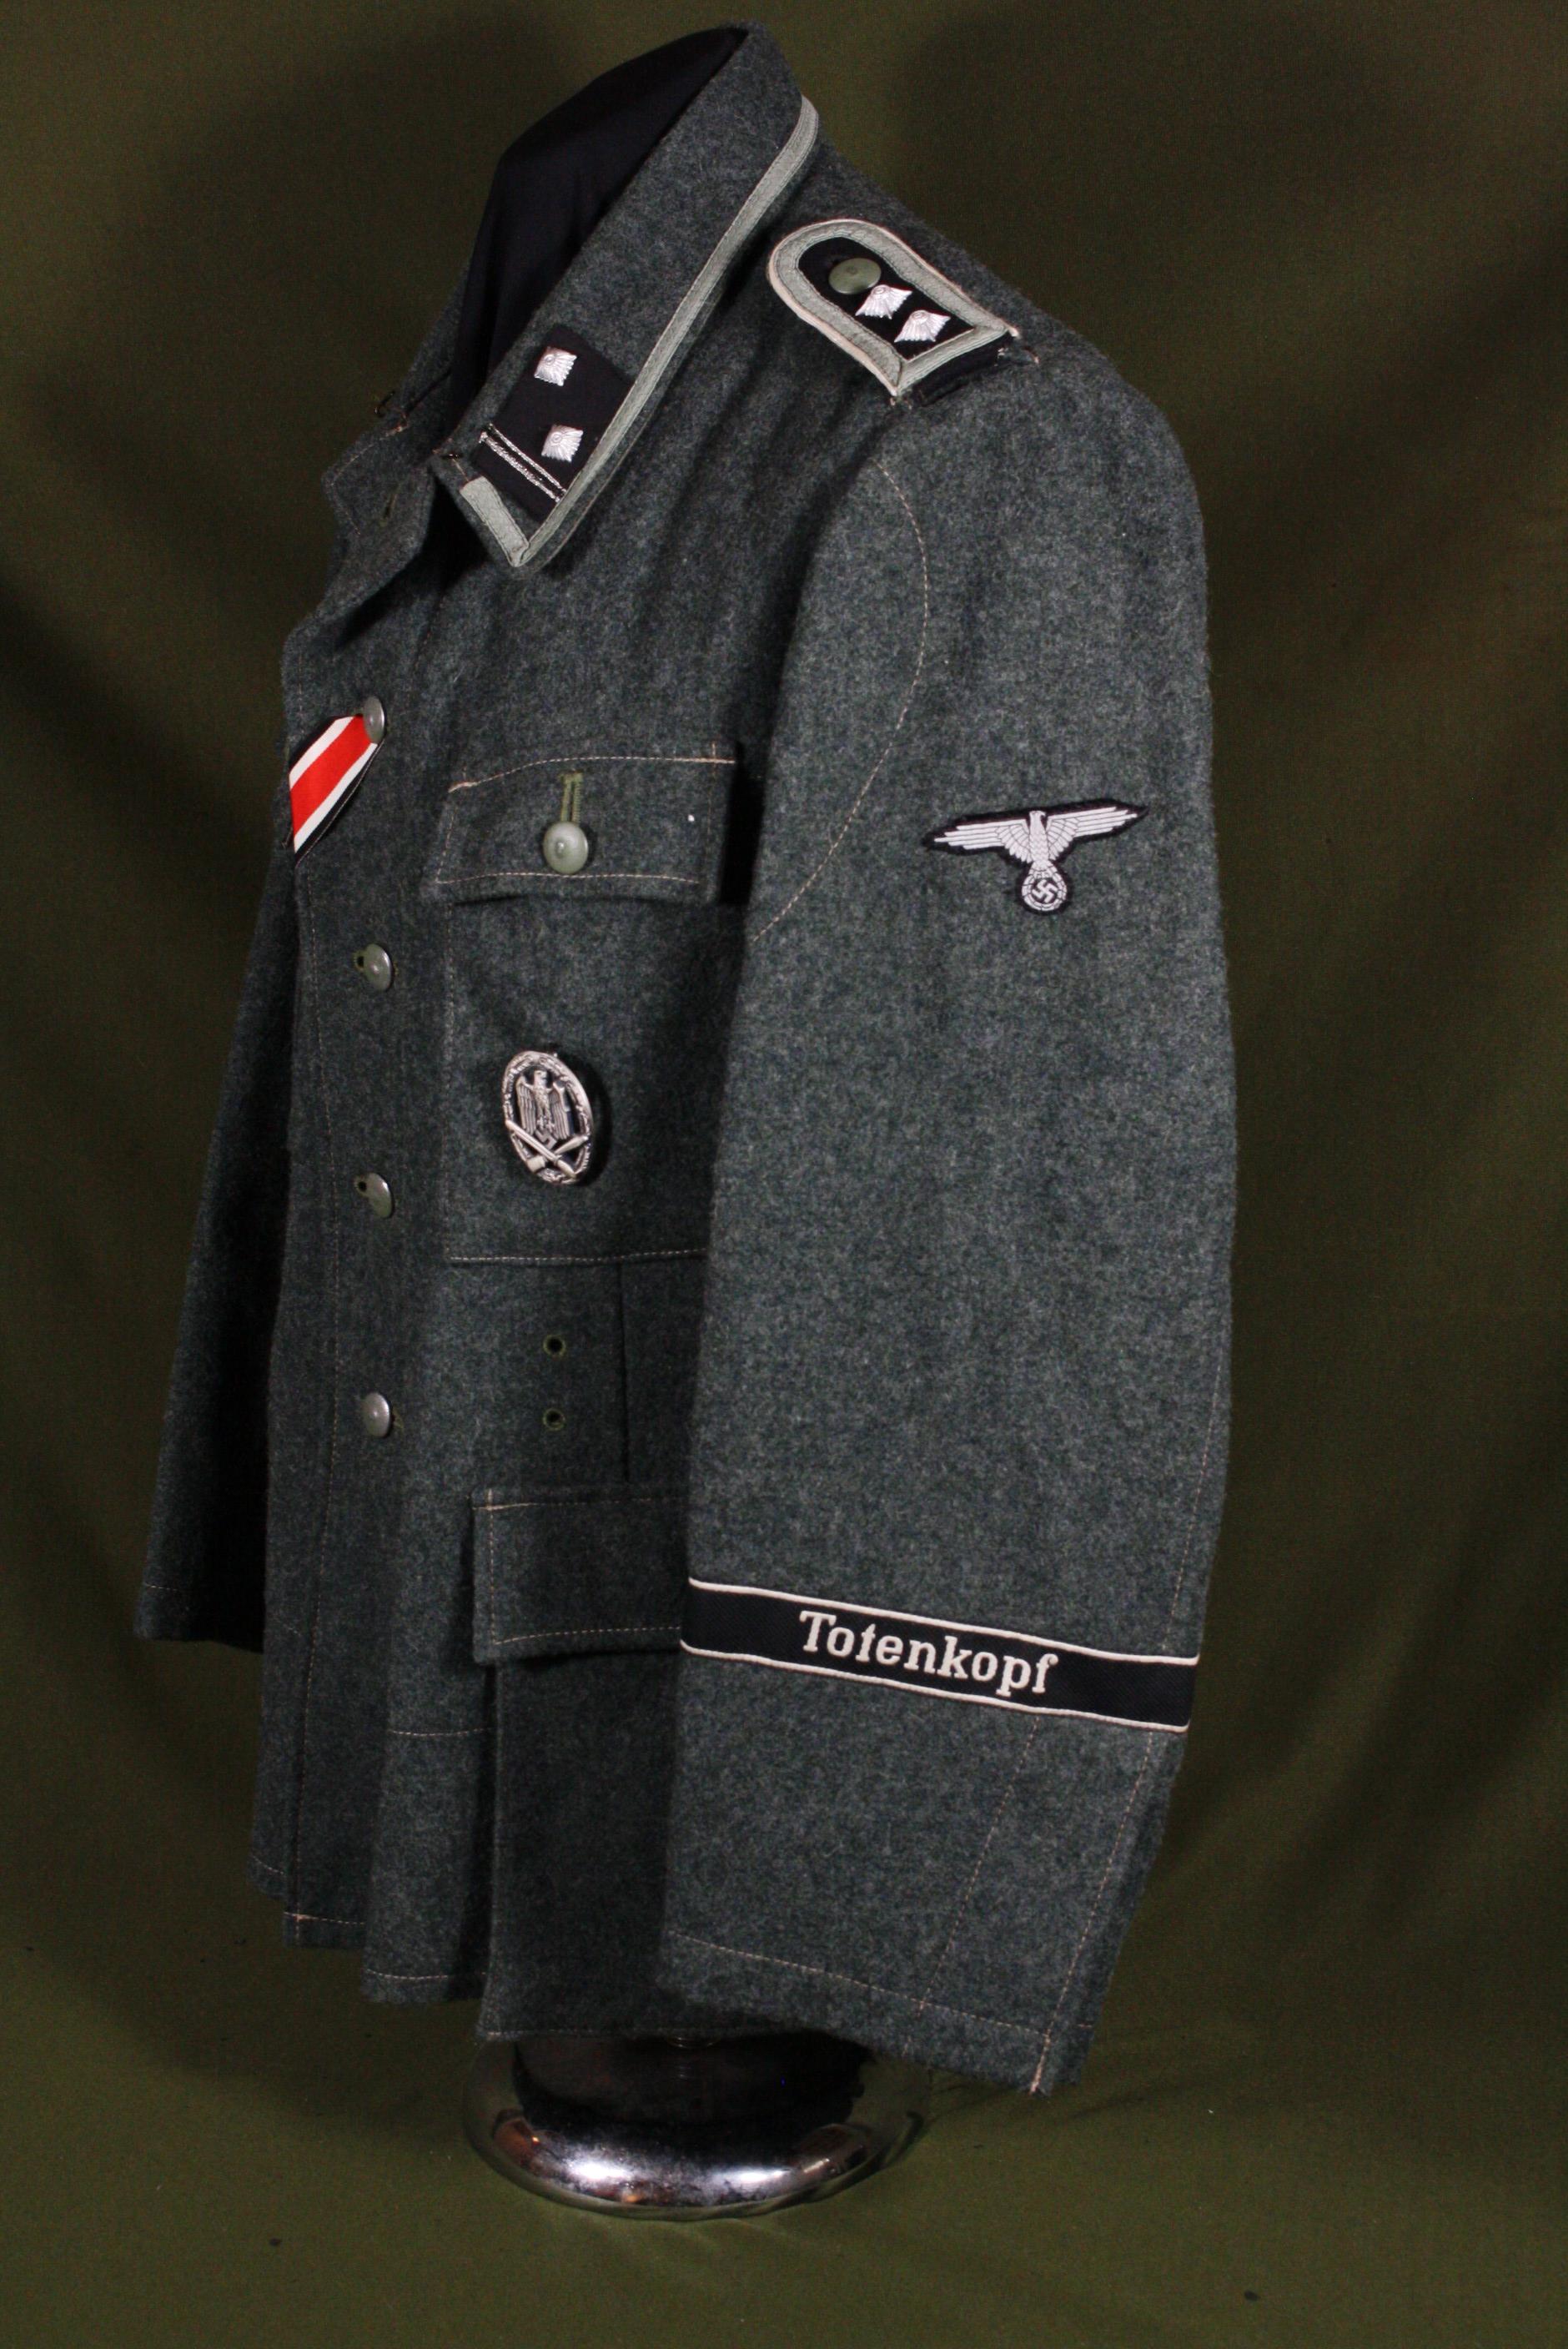 Re-enactor’s WWII Nazi SS Totenkopf Division tunic